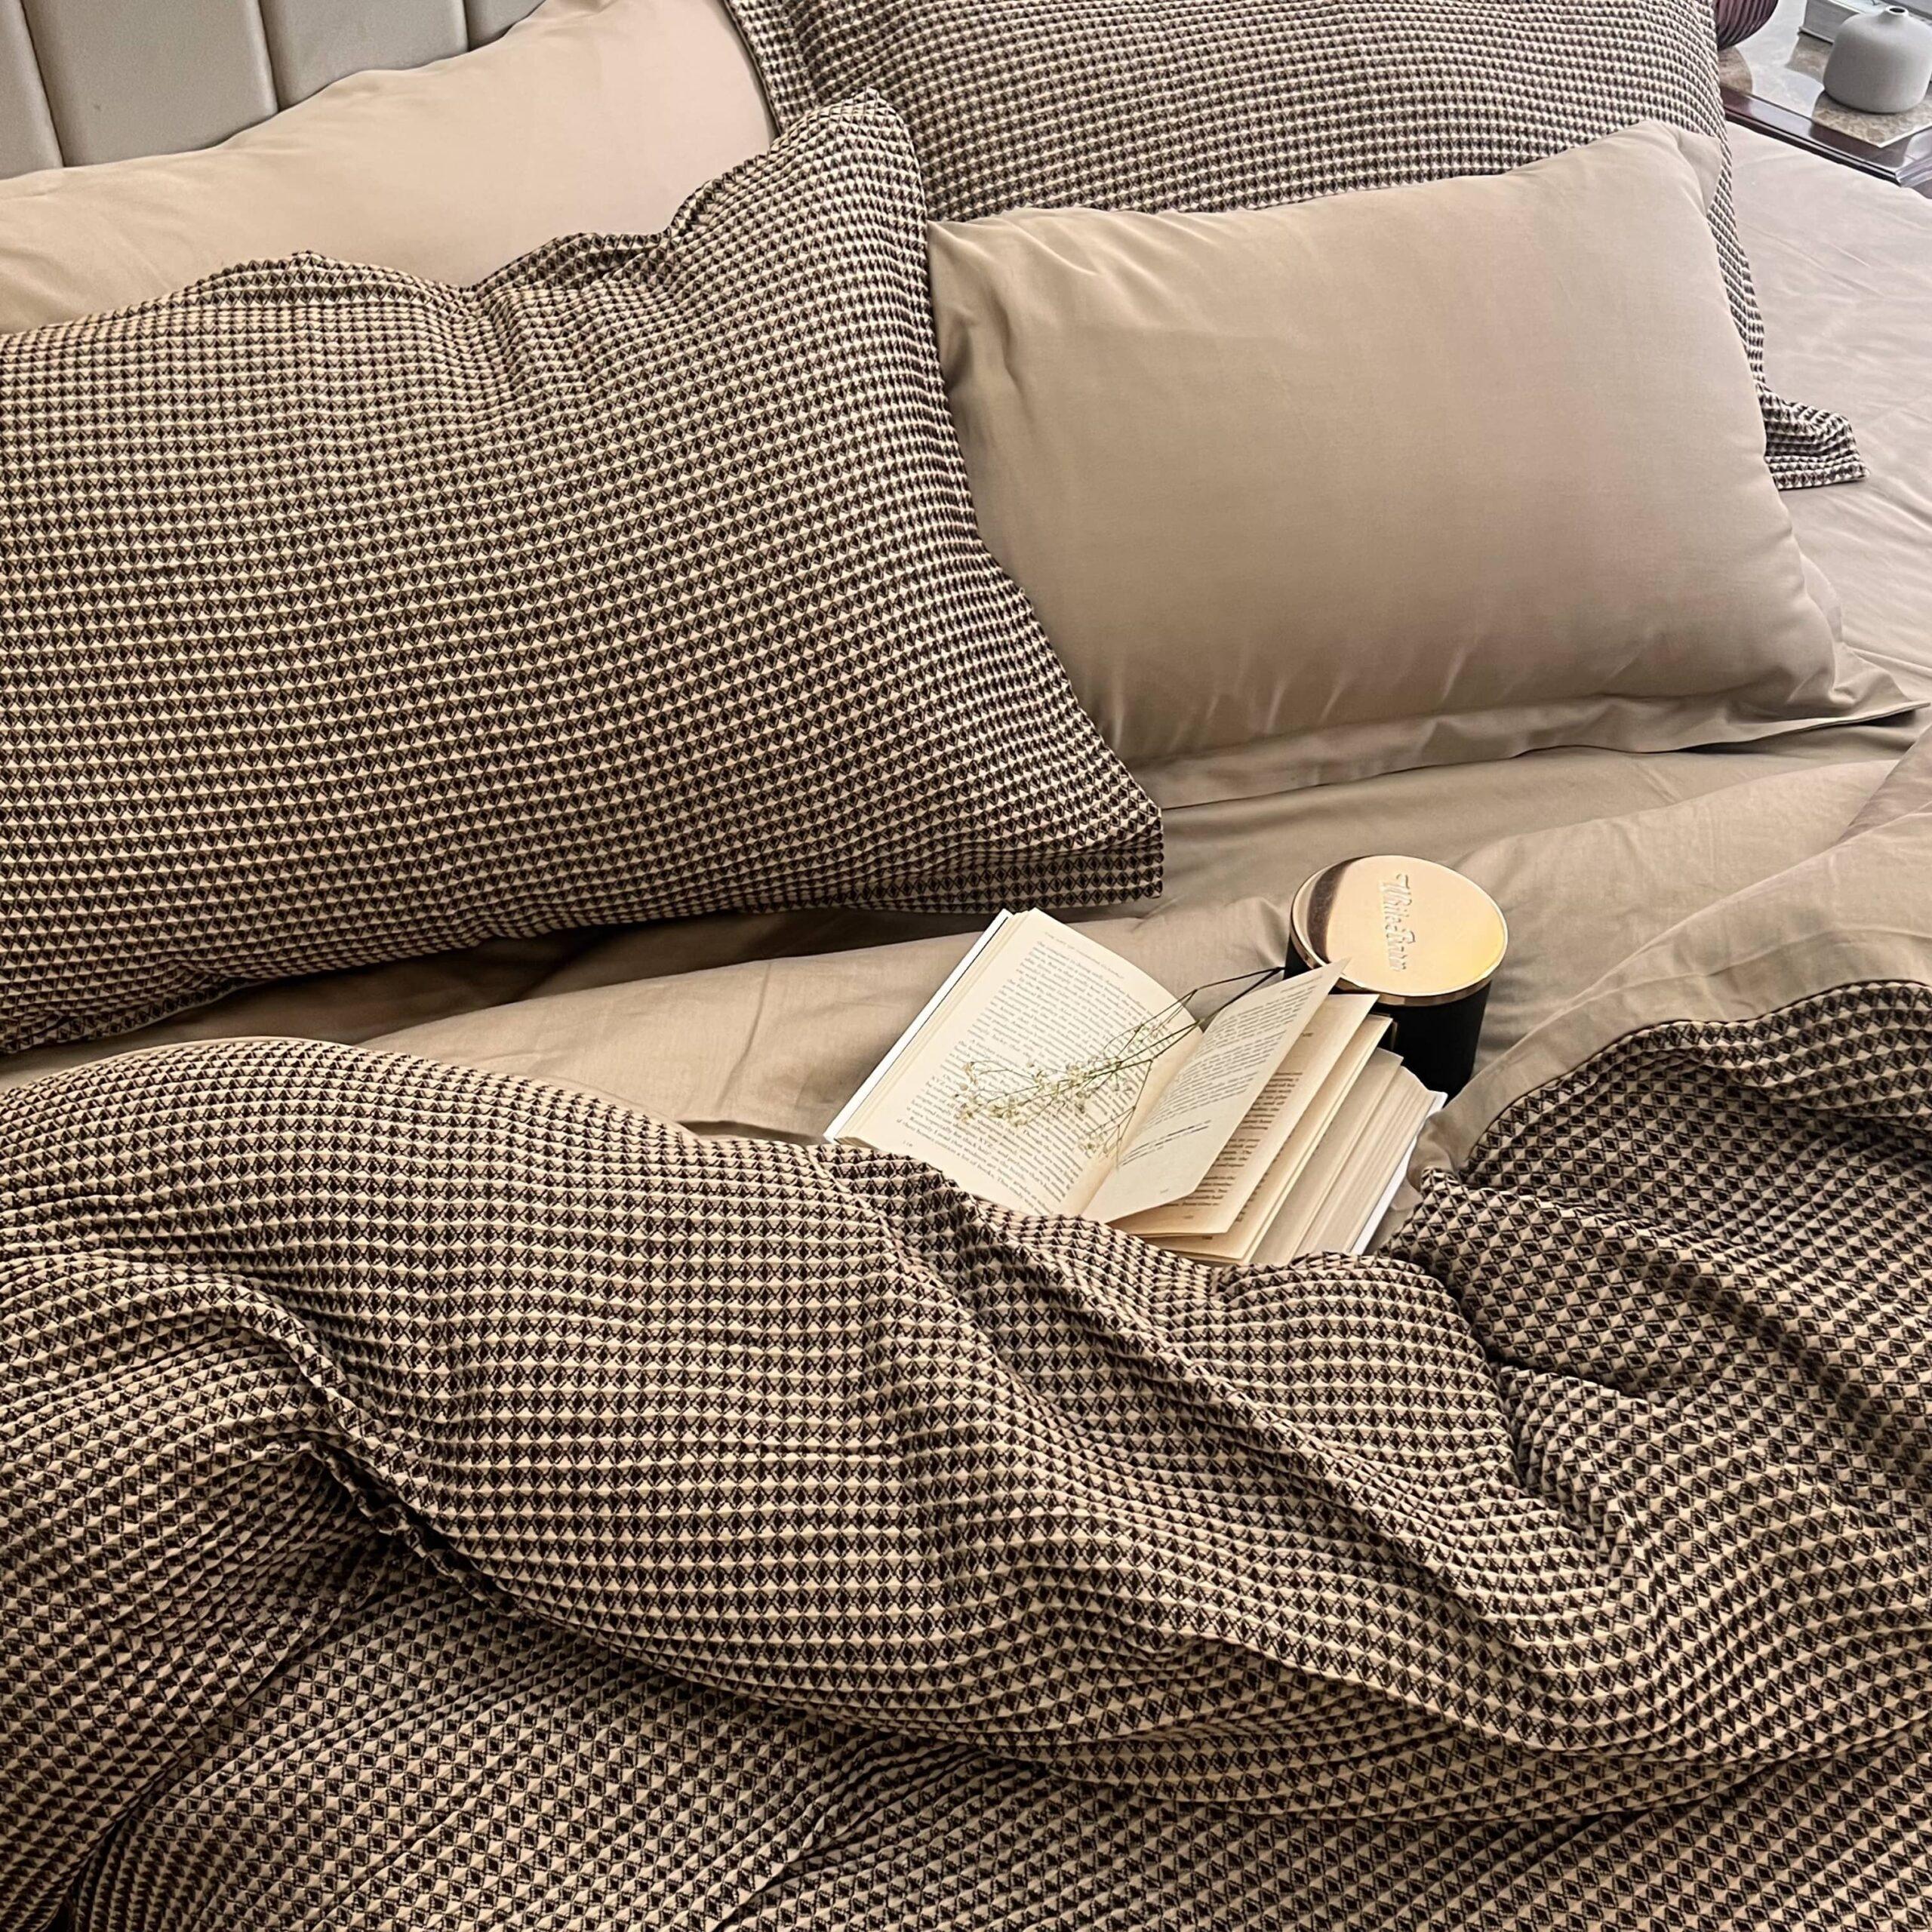 Honeycomb Coffee Woven Duvet Cover